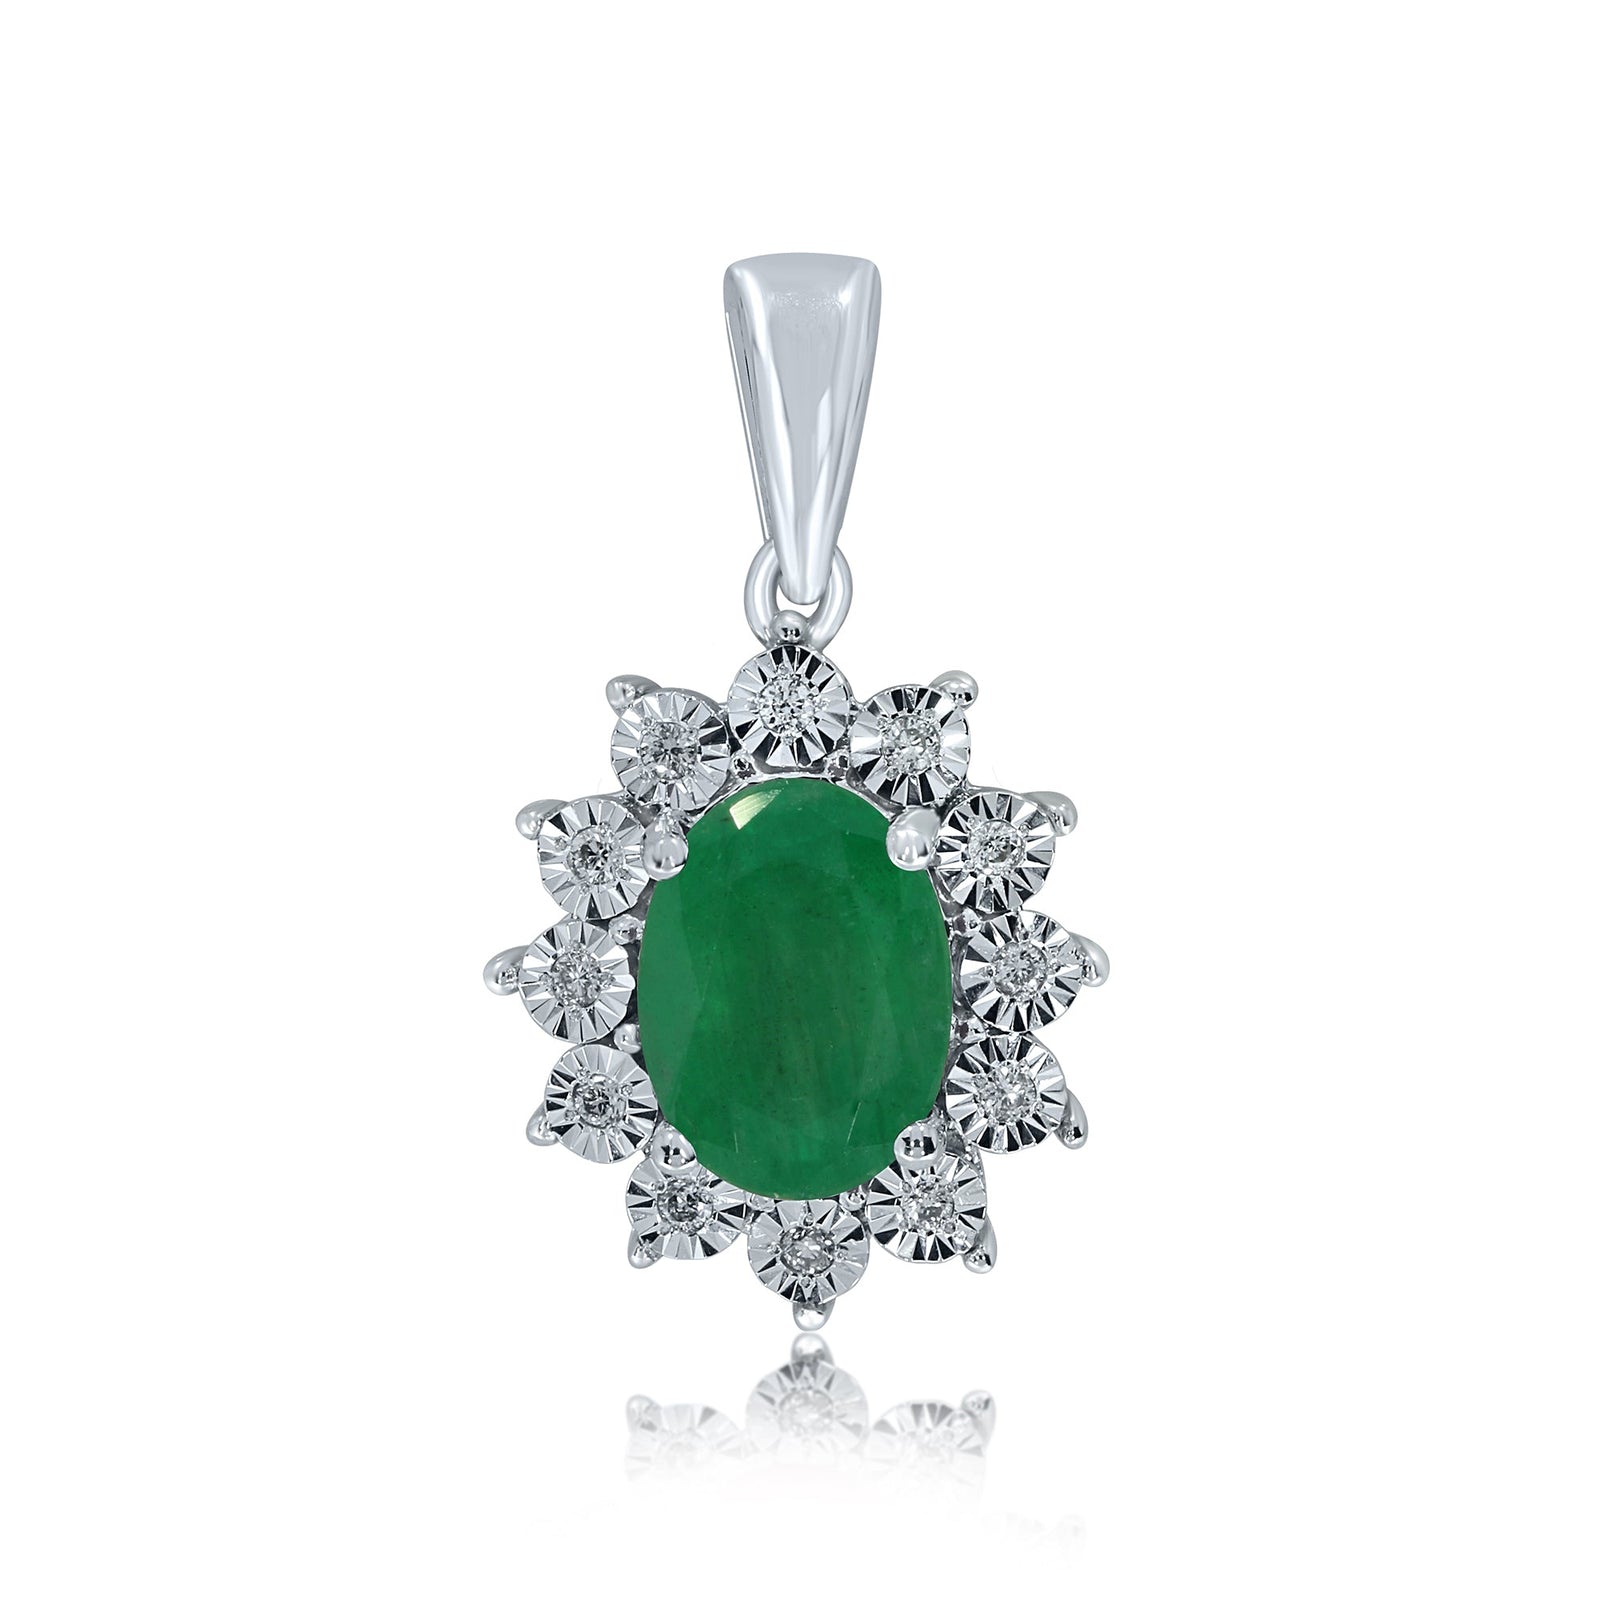 9ct white gold 7x5mm oval emerald & miracle plate diamond cluster pendant 0.04ct